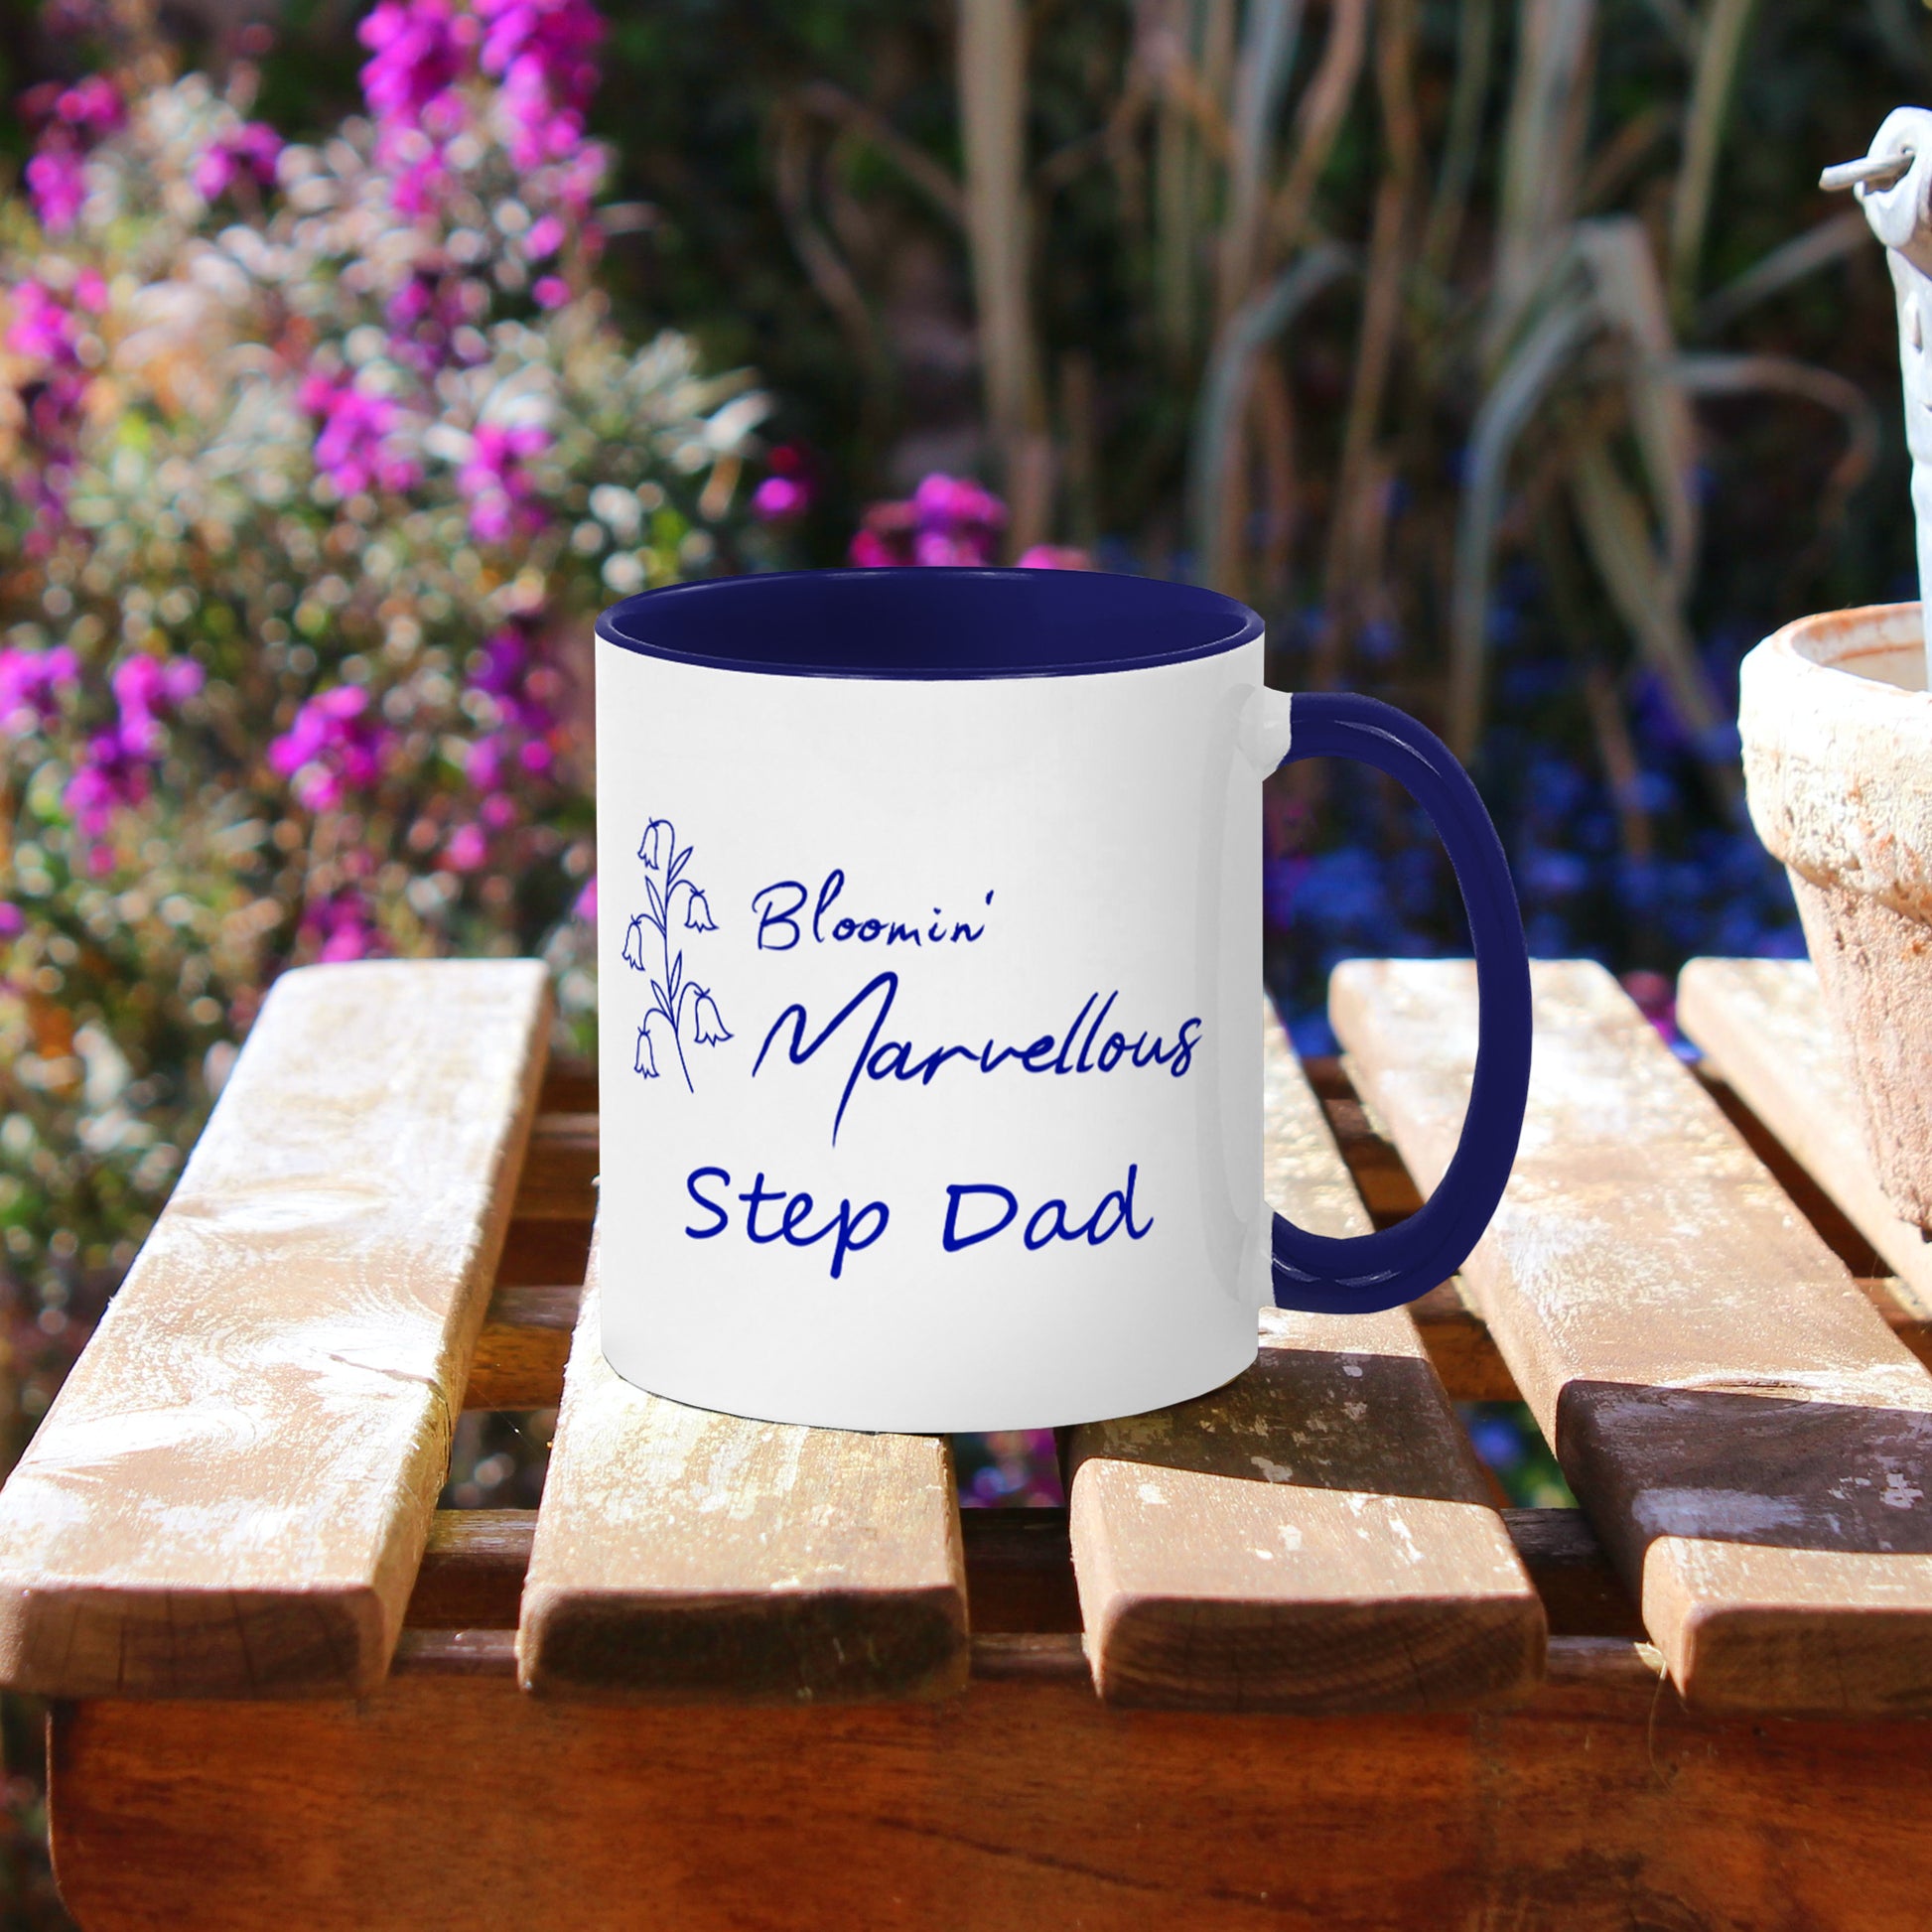 Garden  plant theme mug. Personalised name, White ceramic 11oz coffee cup with navy blue handle and inner. Floral design navy blue bluebells outline and wording Bloomin Marvellous in script style font next to flowers. Personalisation Step Dad below.